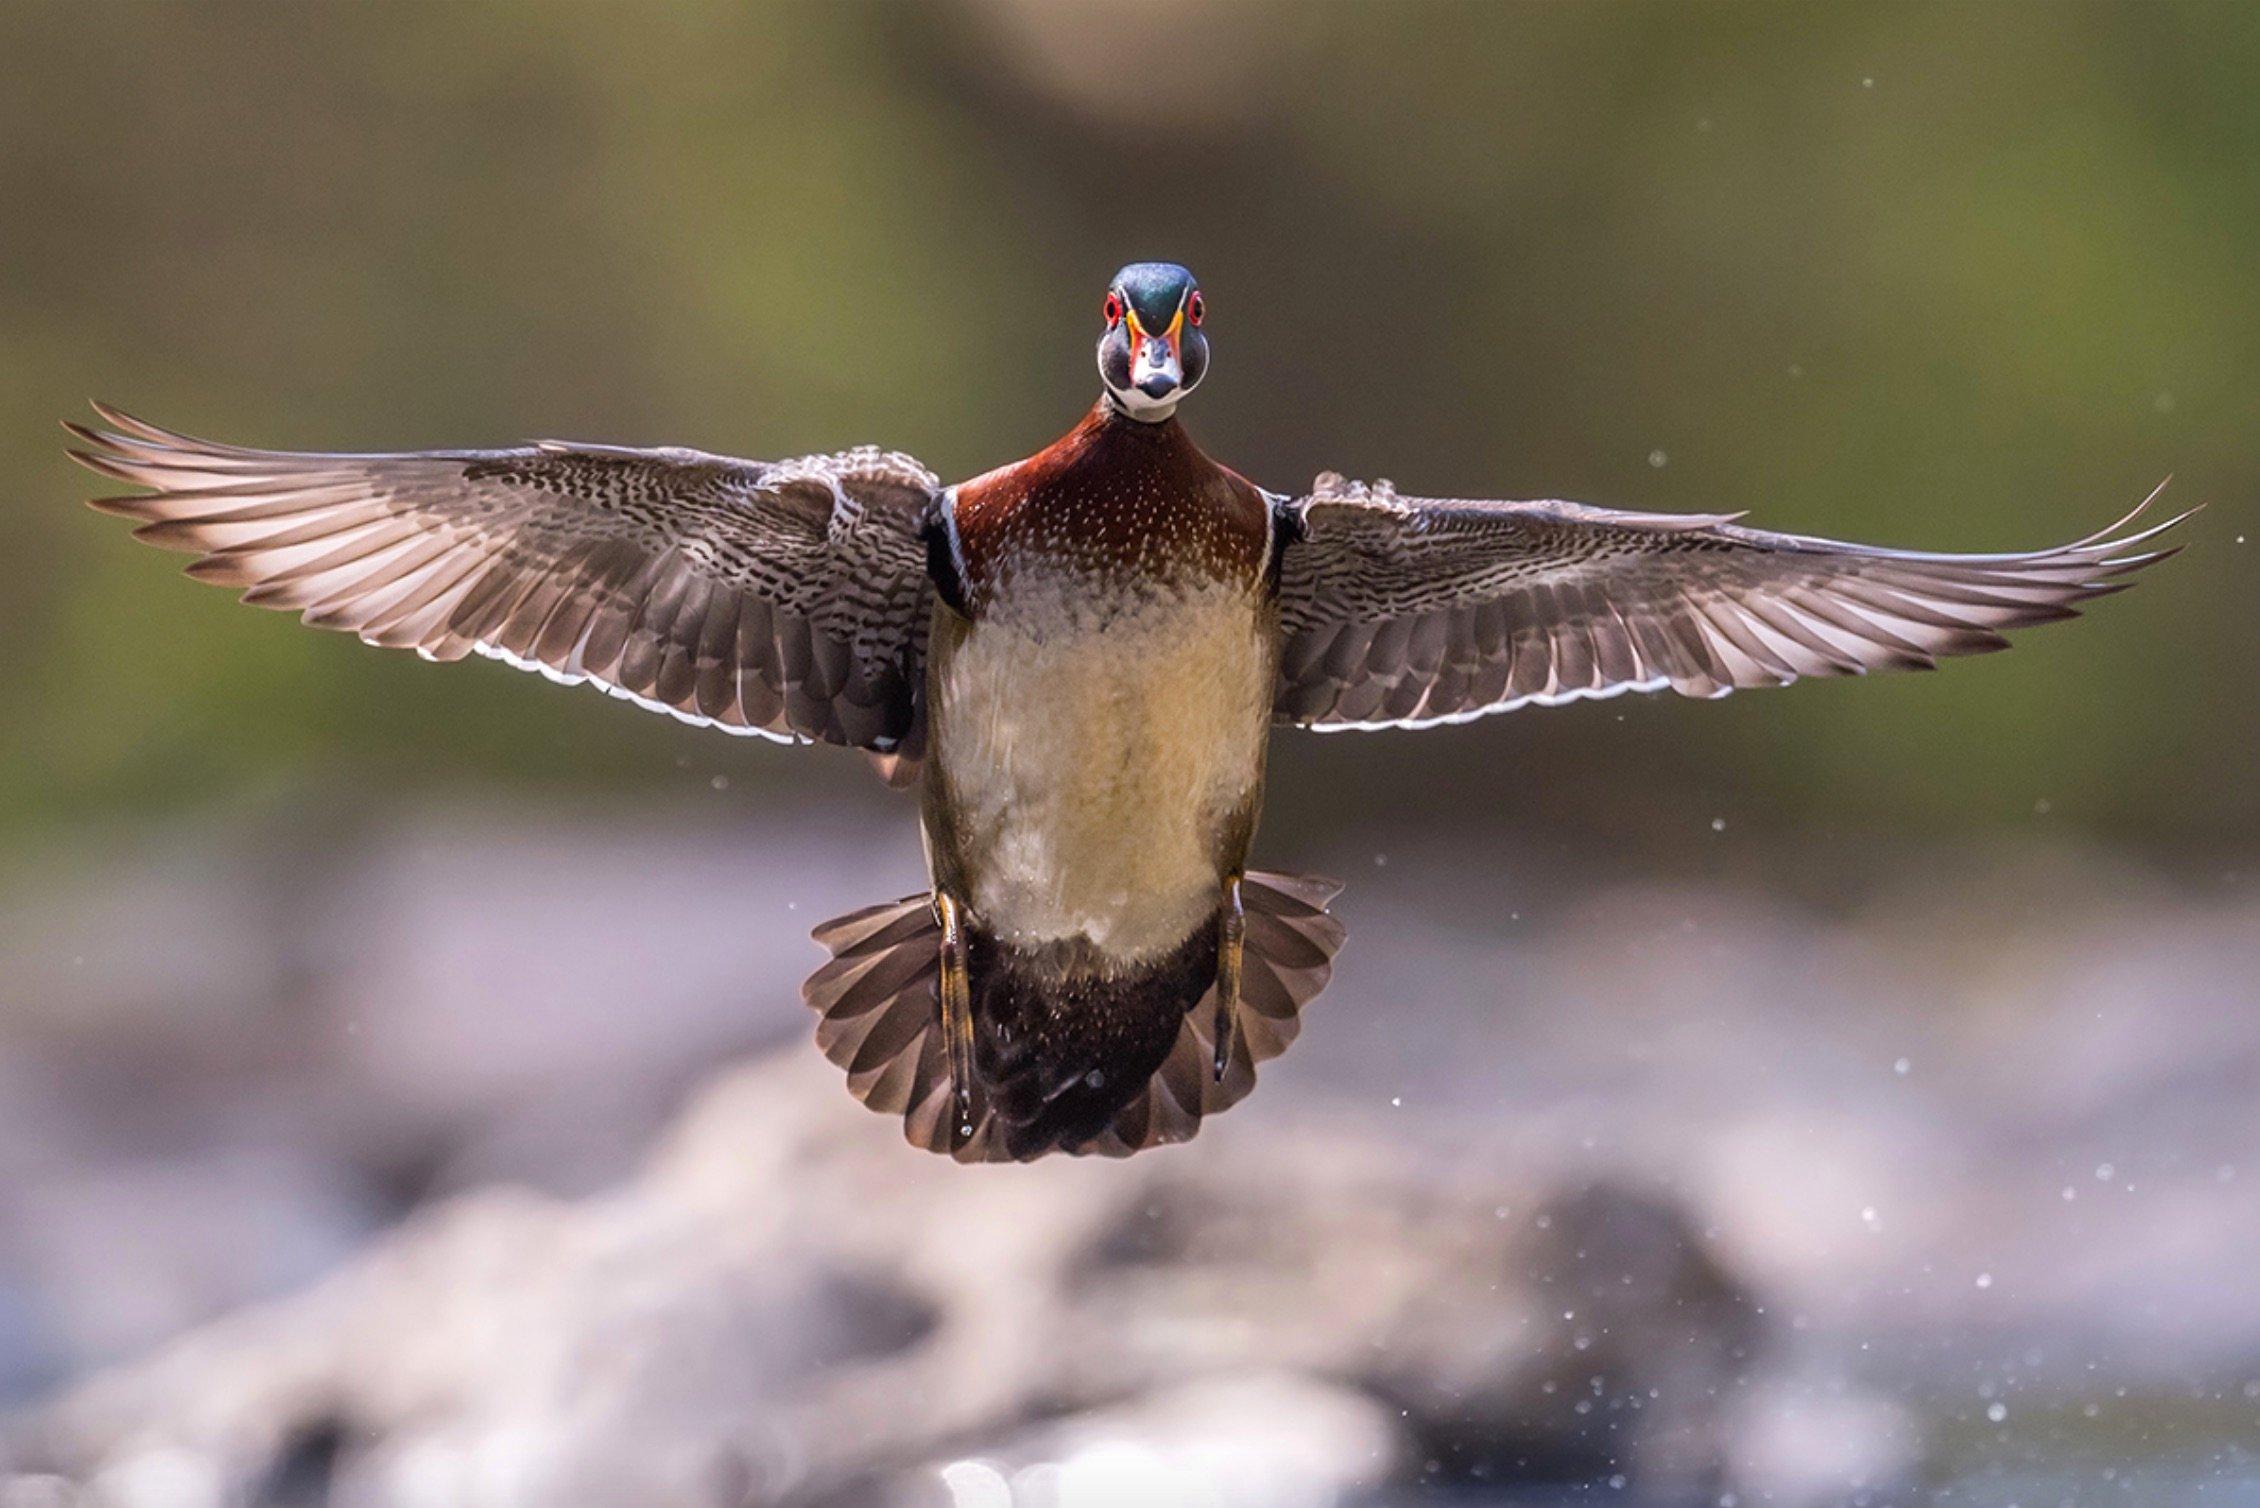 East of the Mississippi River, waterfowling often involves wood ducks. They're a bread-and-butter bird. Photo © Collins93/Shutterstock